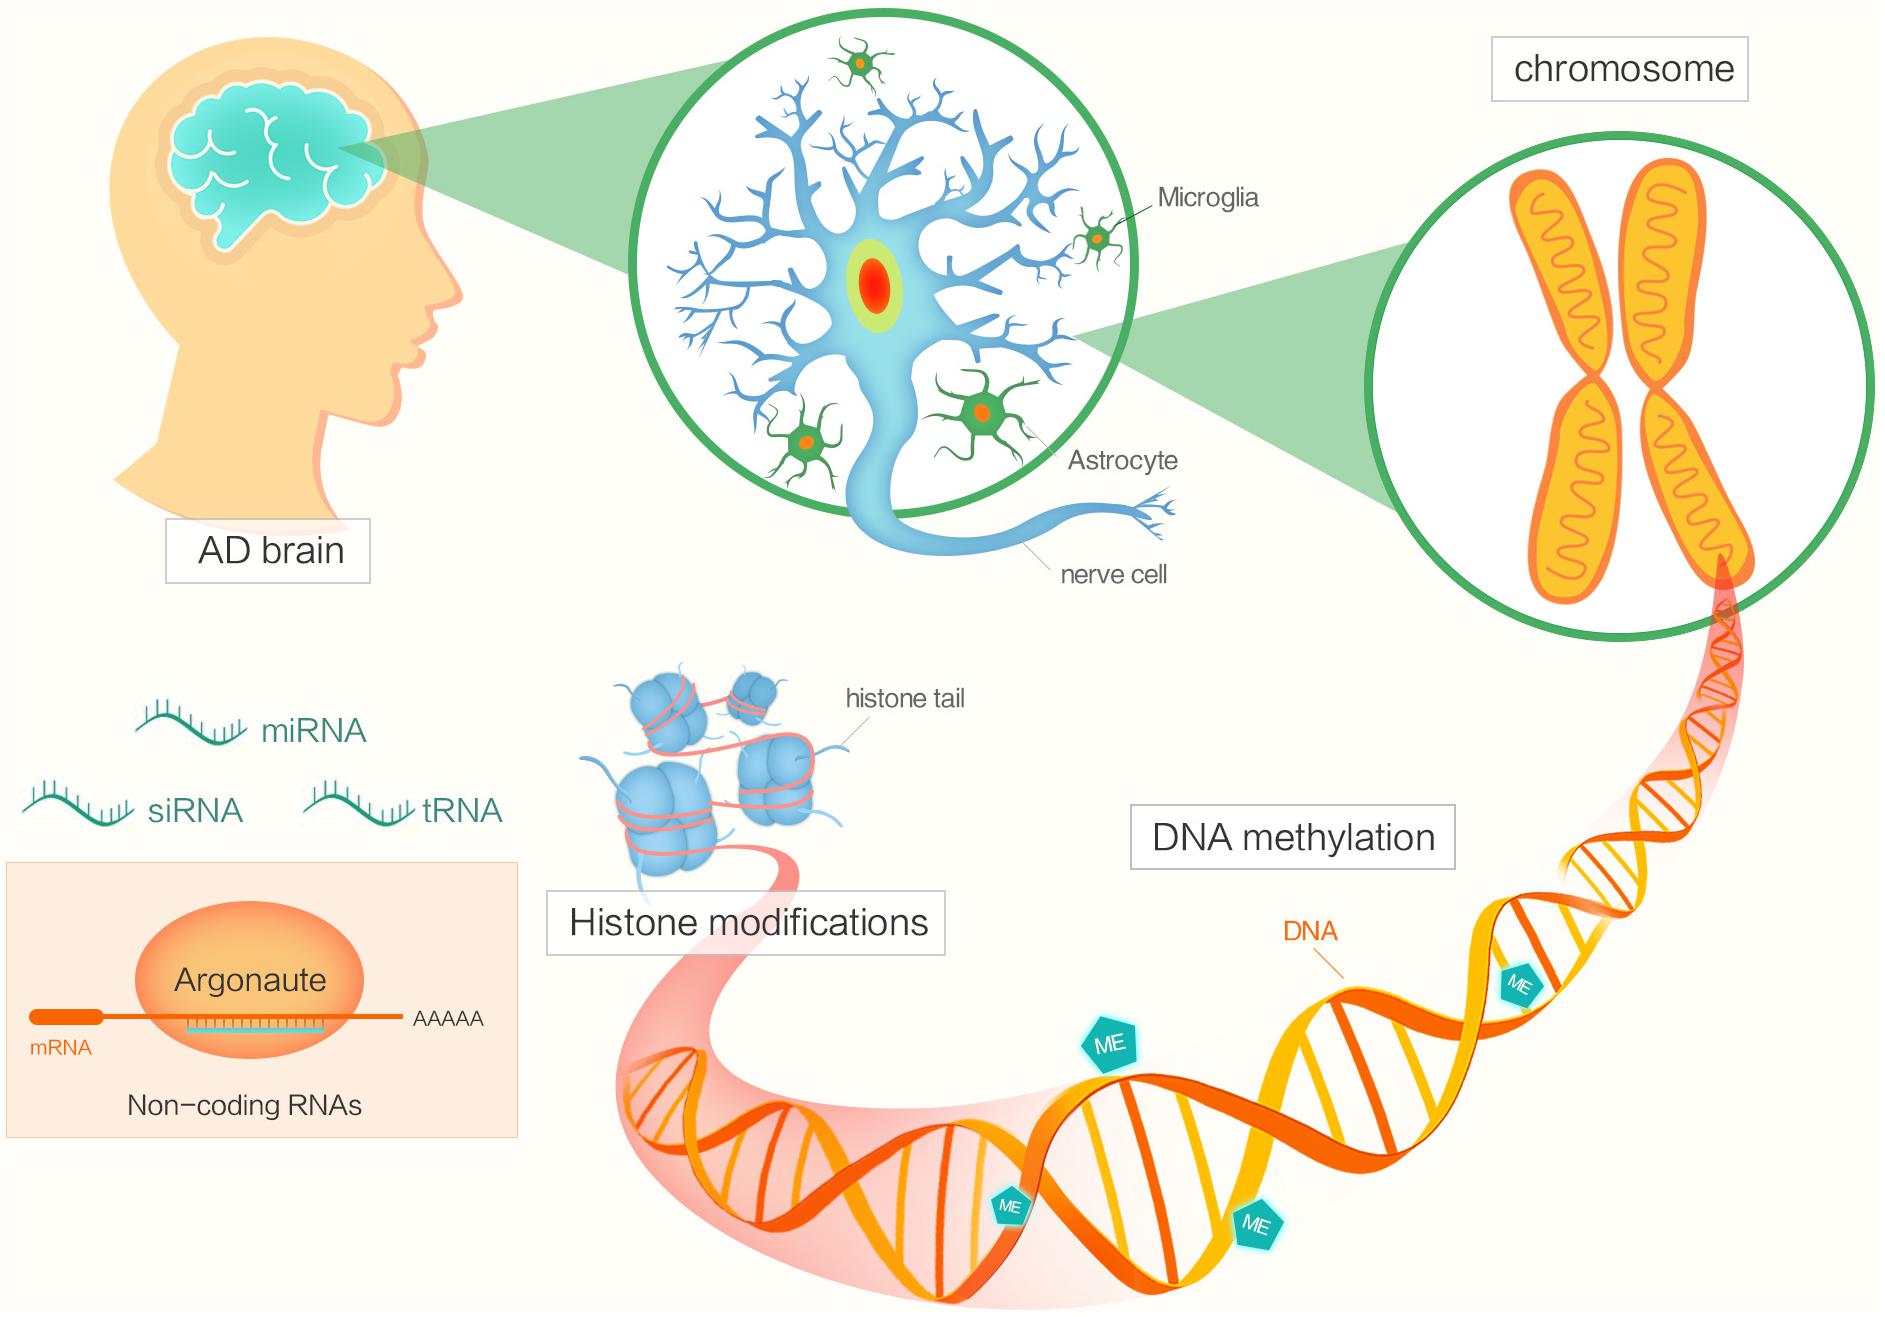 Epigenetic changes in the brain drive late